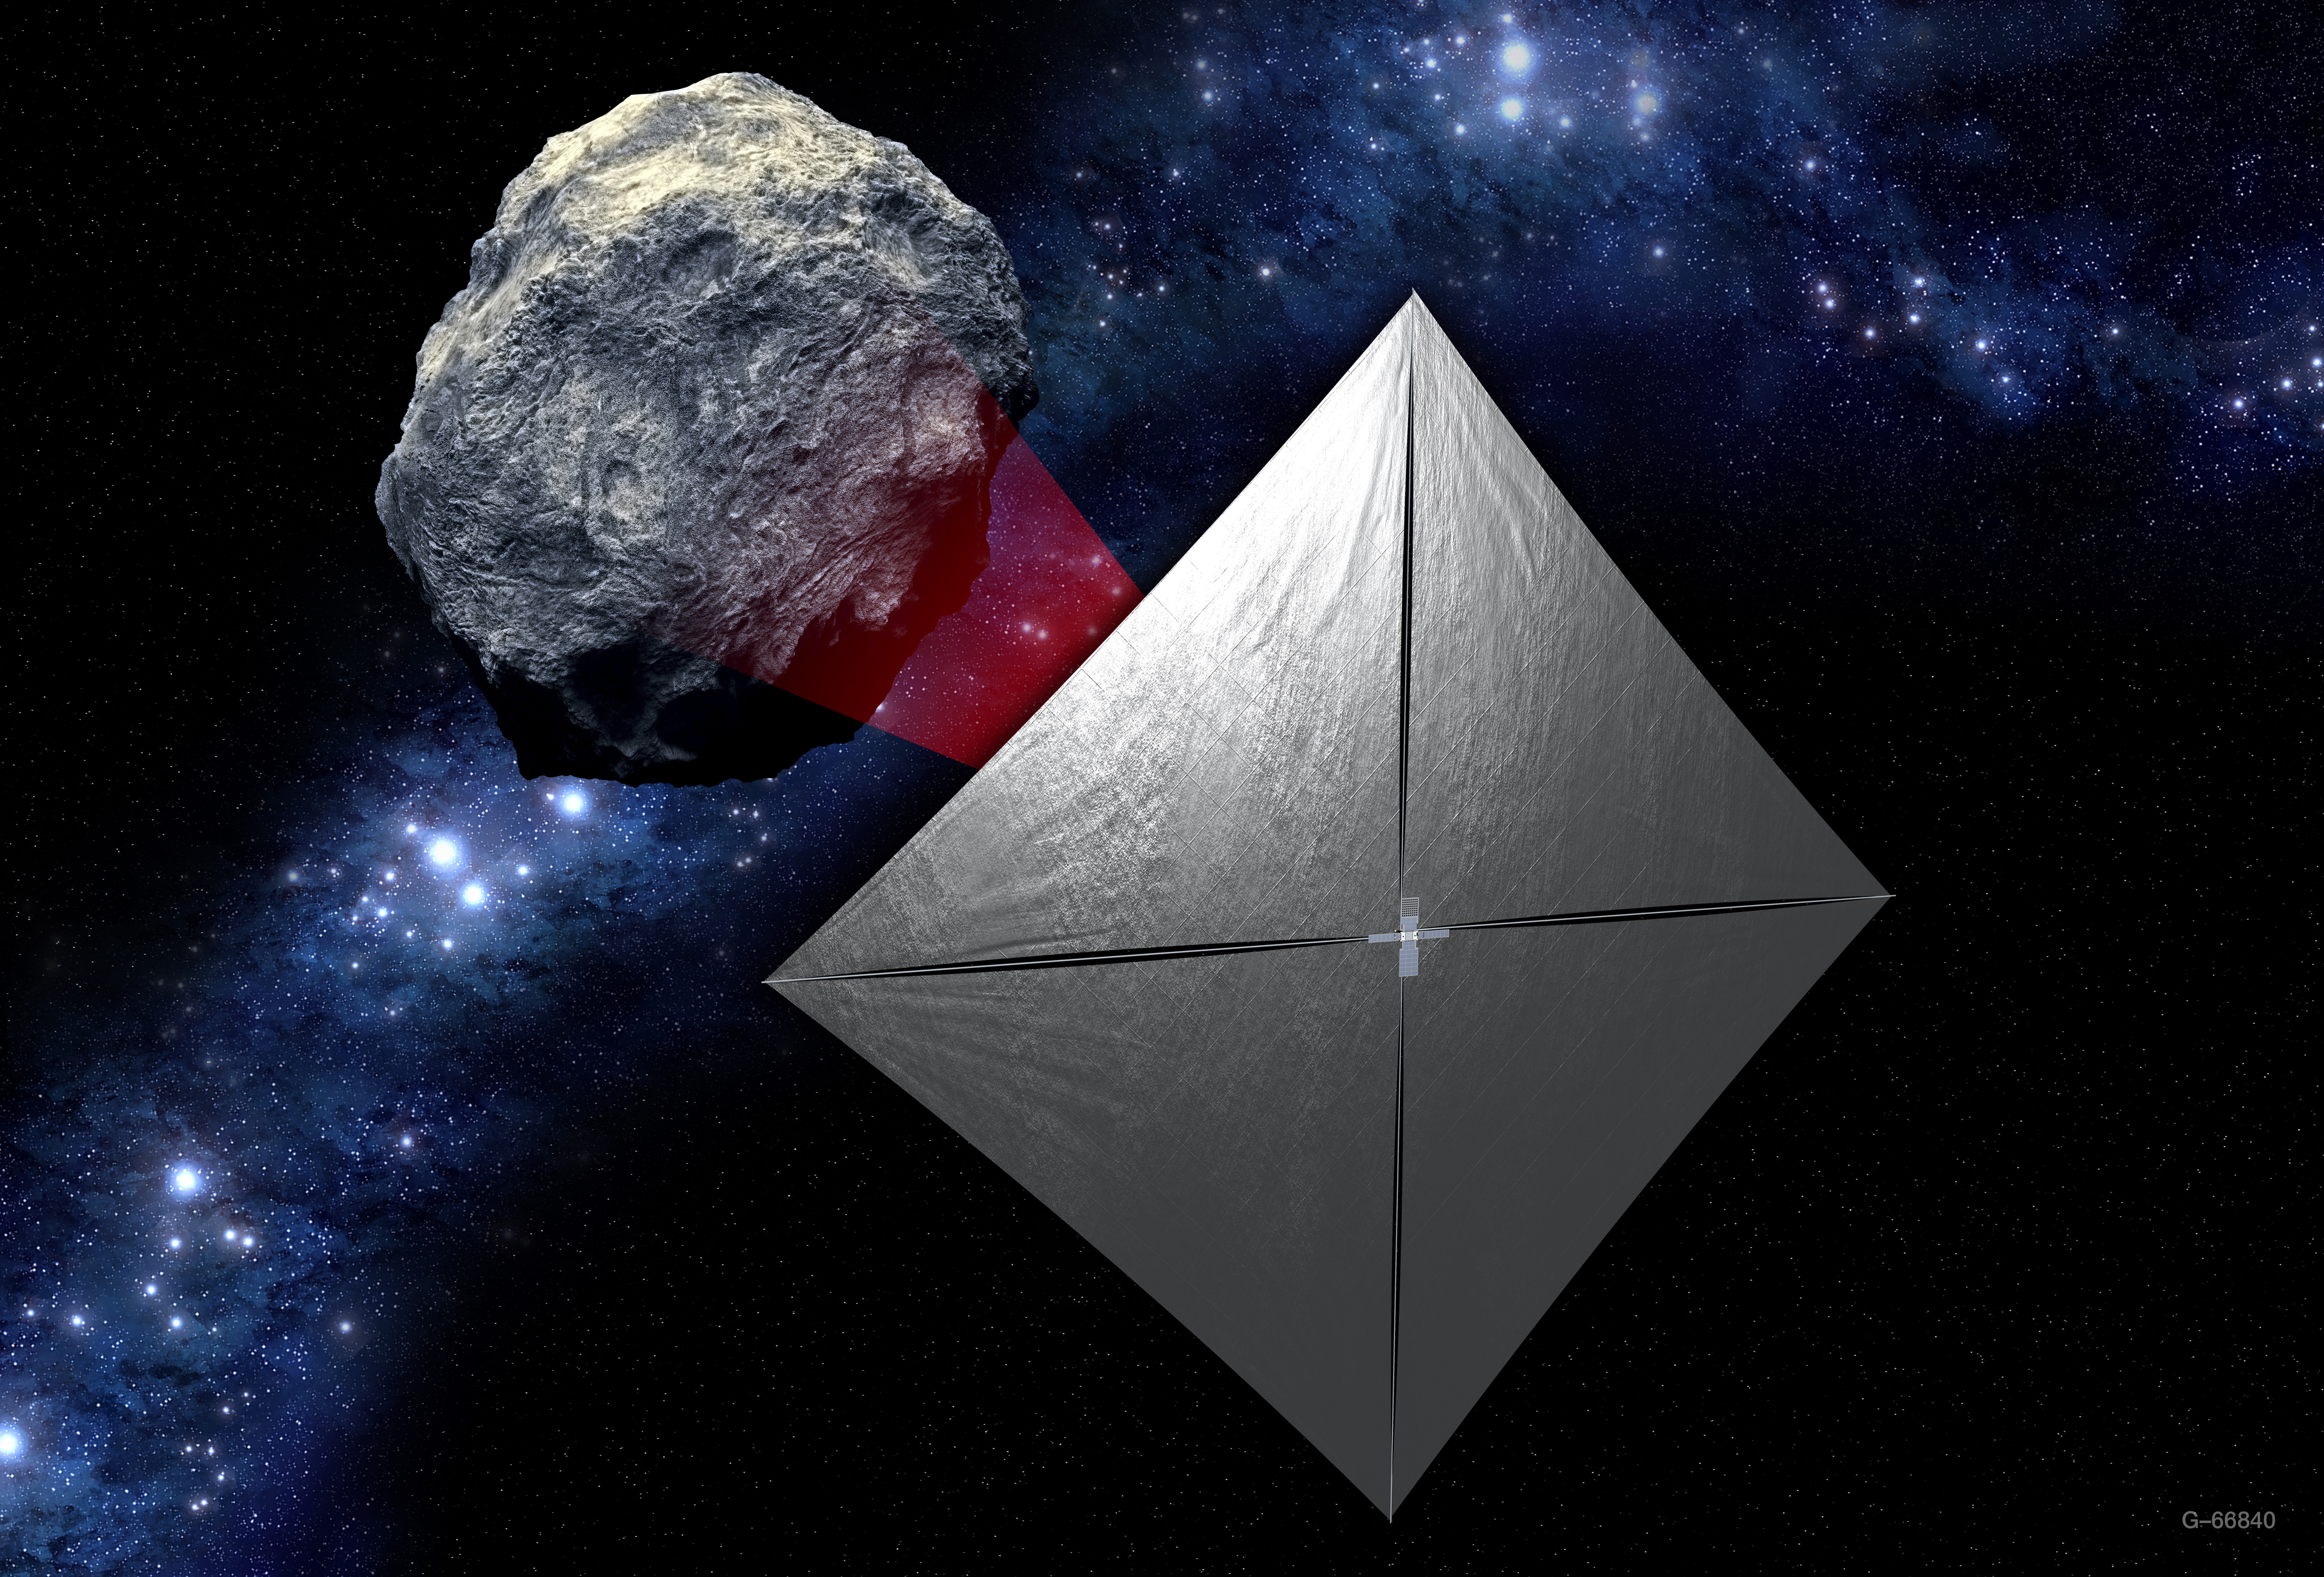 cubesat hides behind solar sail and sends a beam towards an asteroid